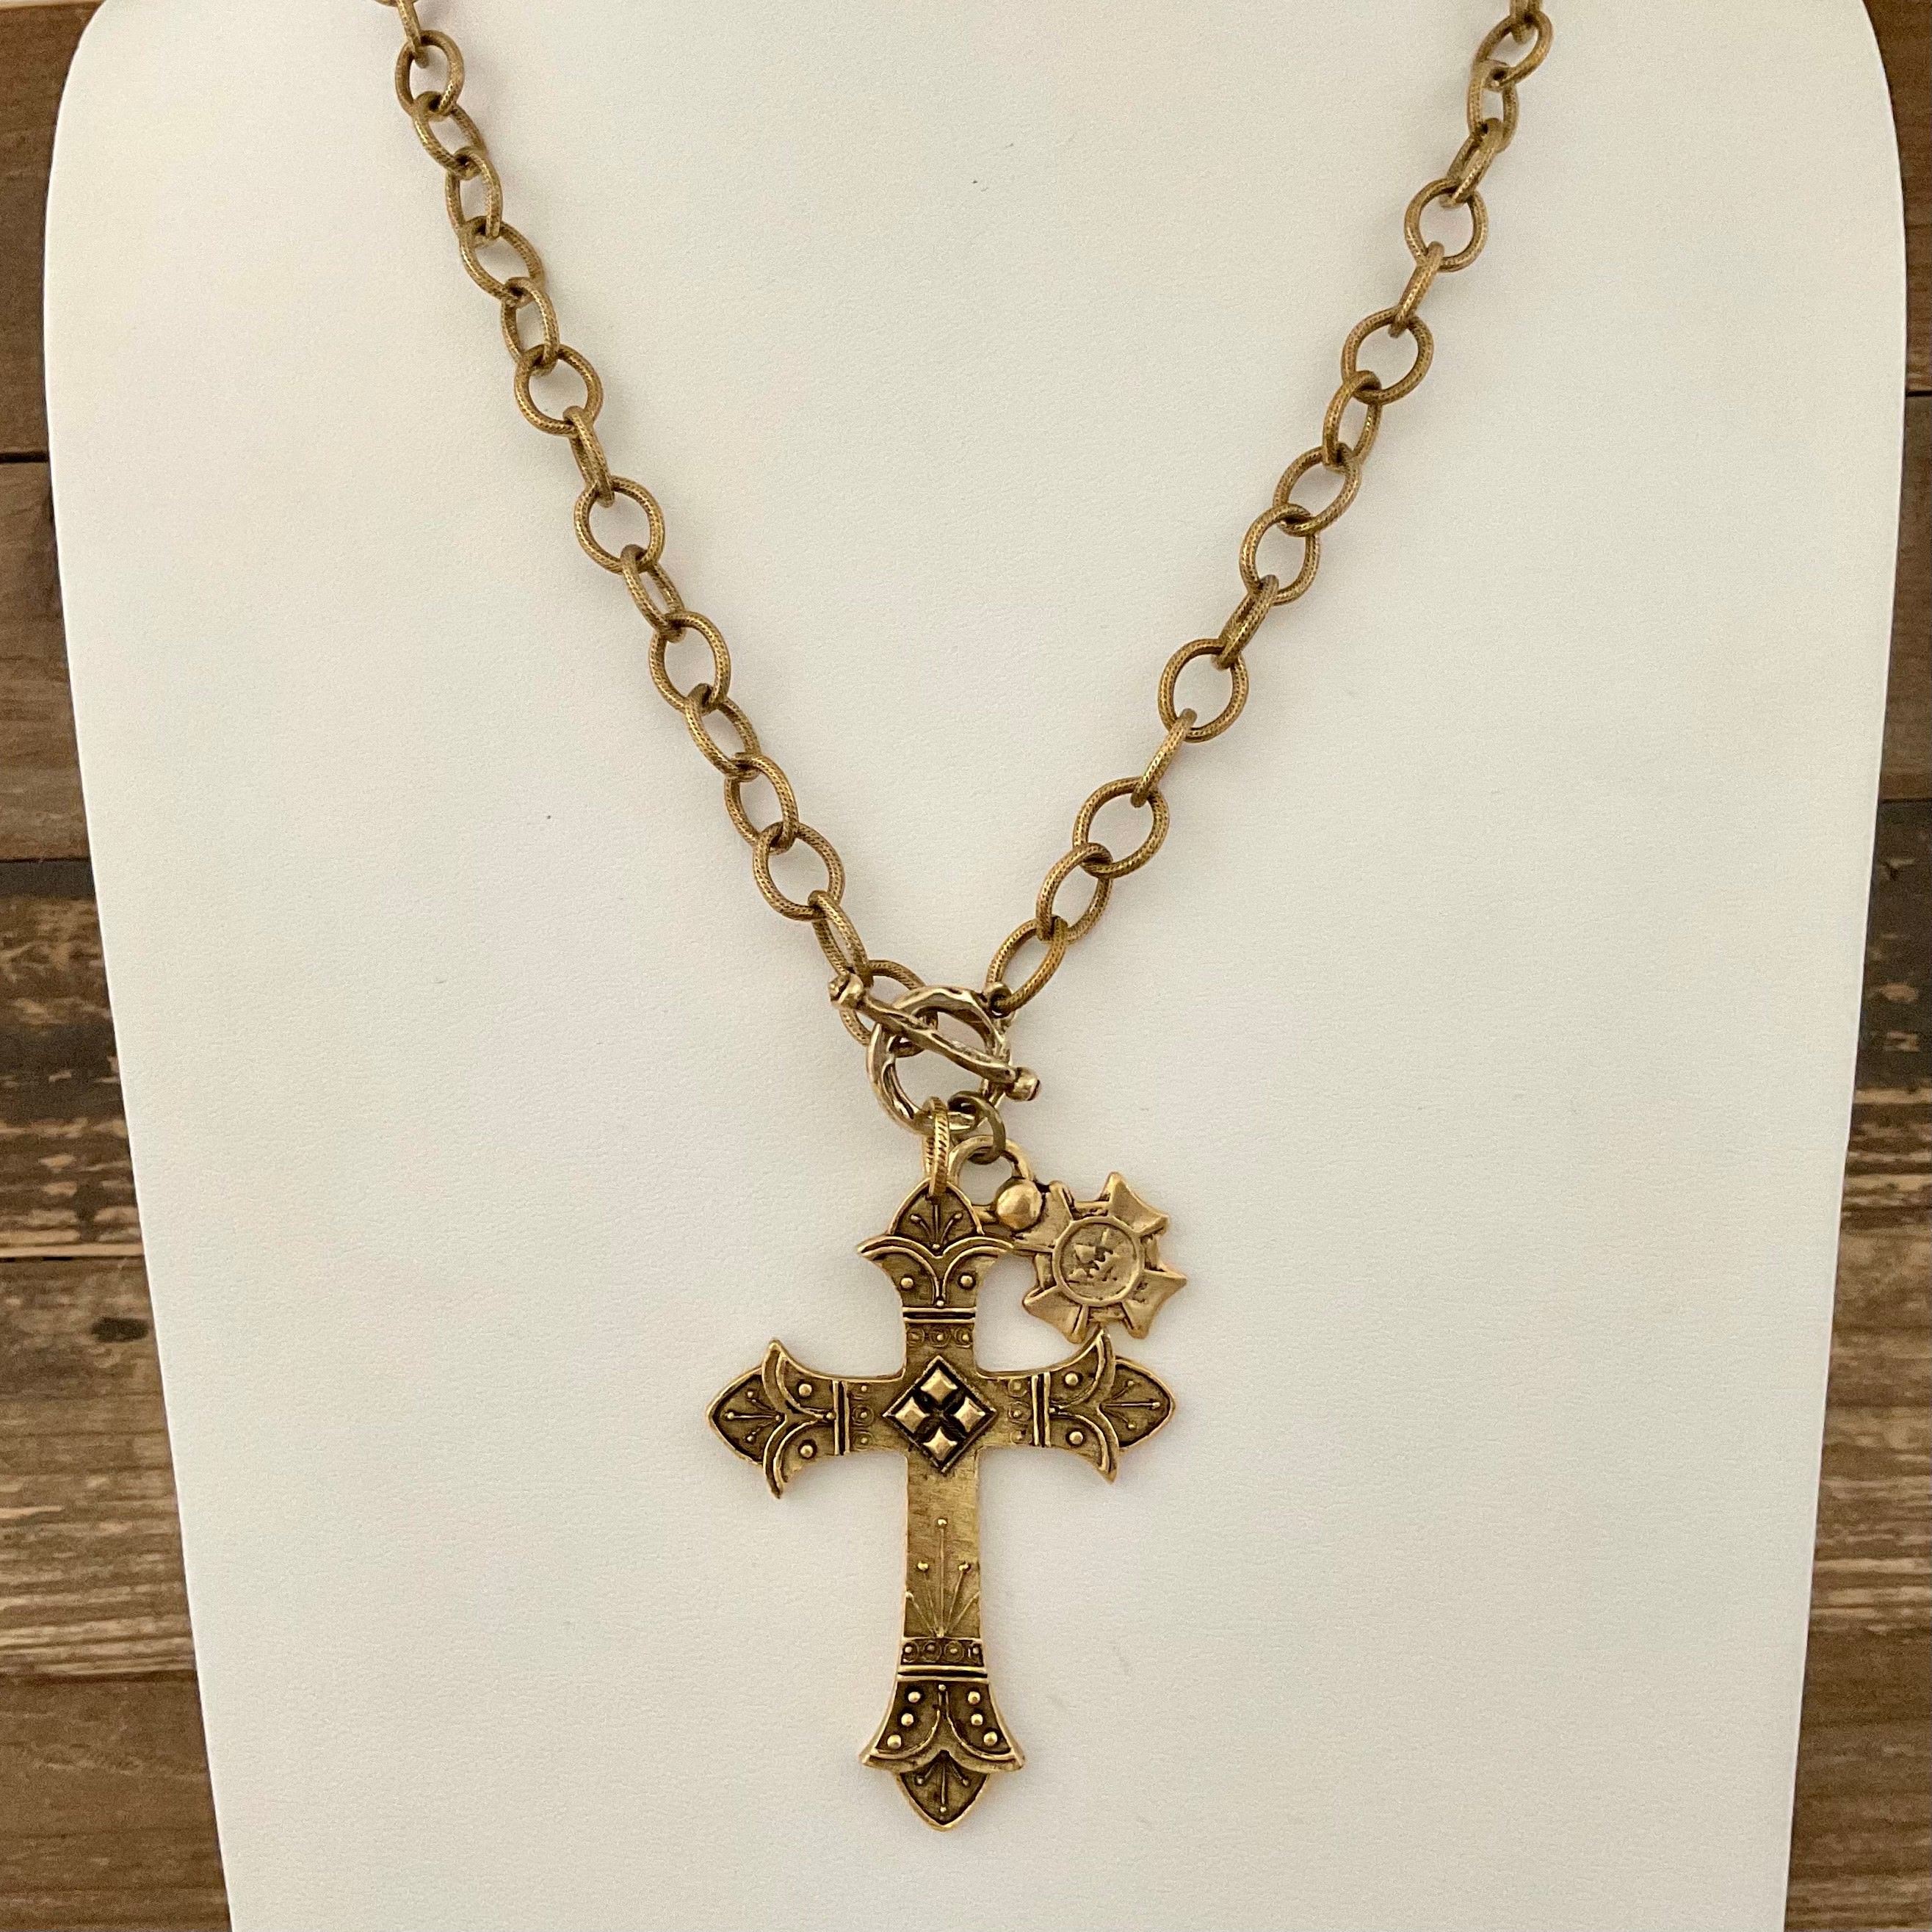 Vintage Gold Plated Necklace with Reproduction Cross & Religious Medallion 30